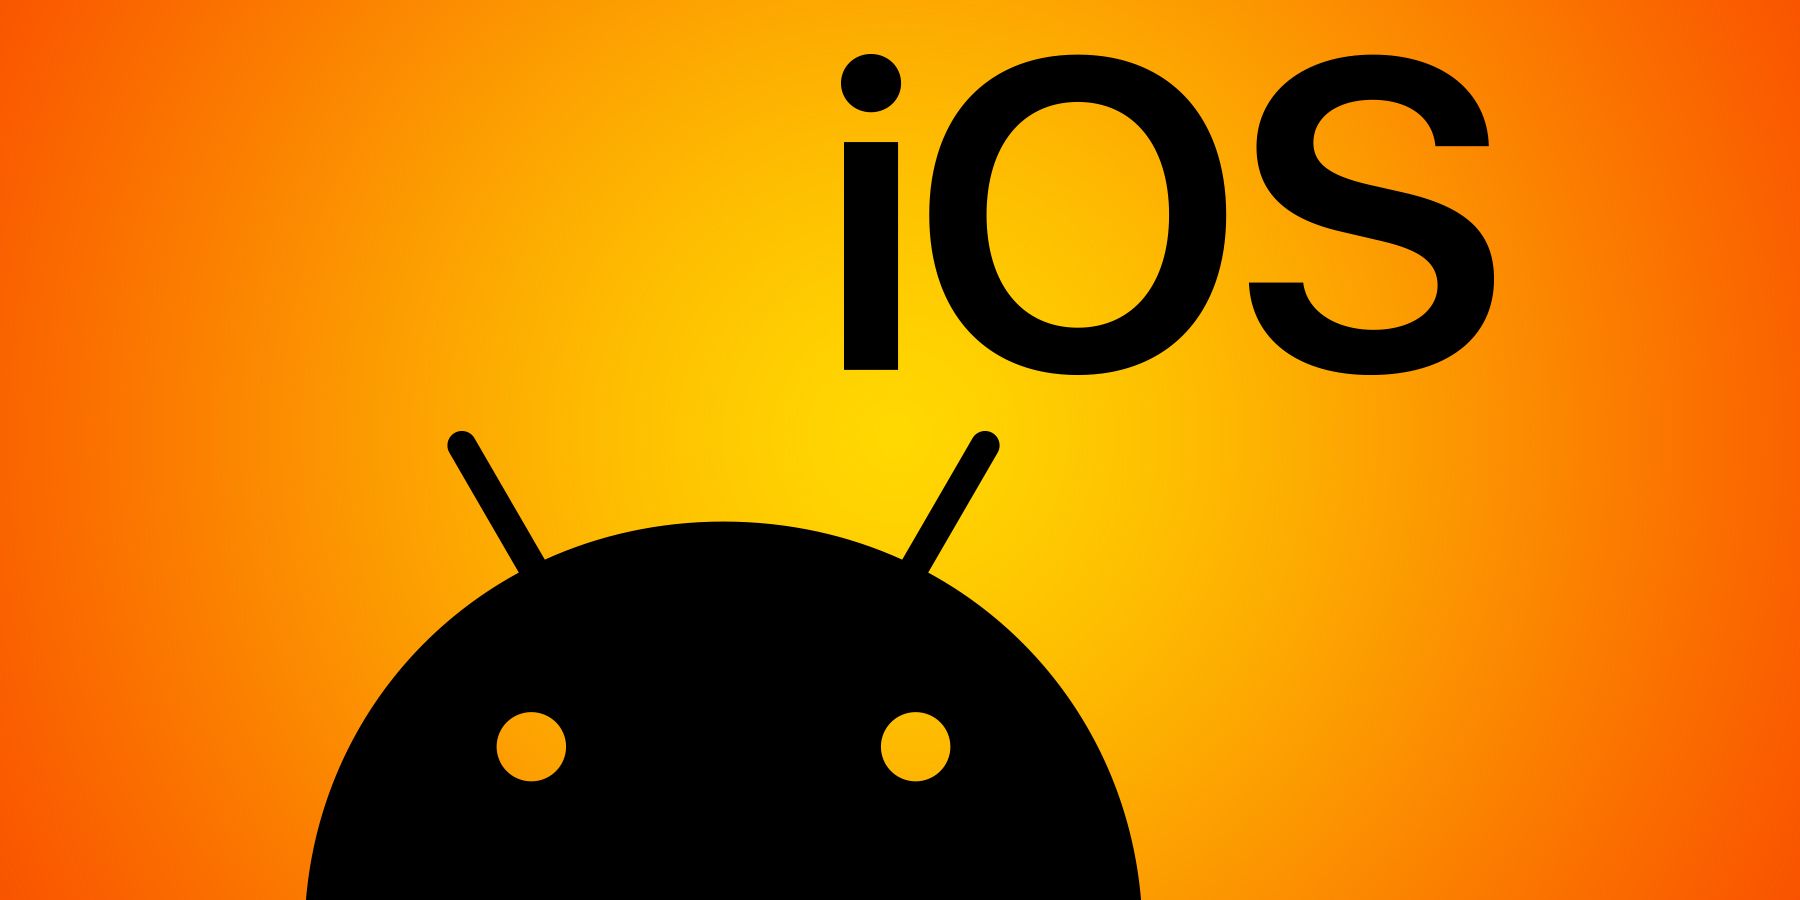 Android vs iPhone: Which OS is Better?